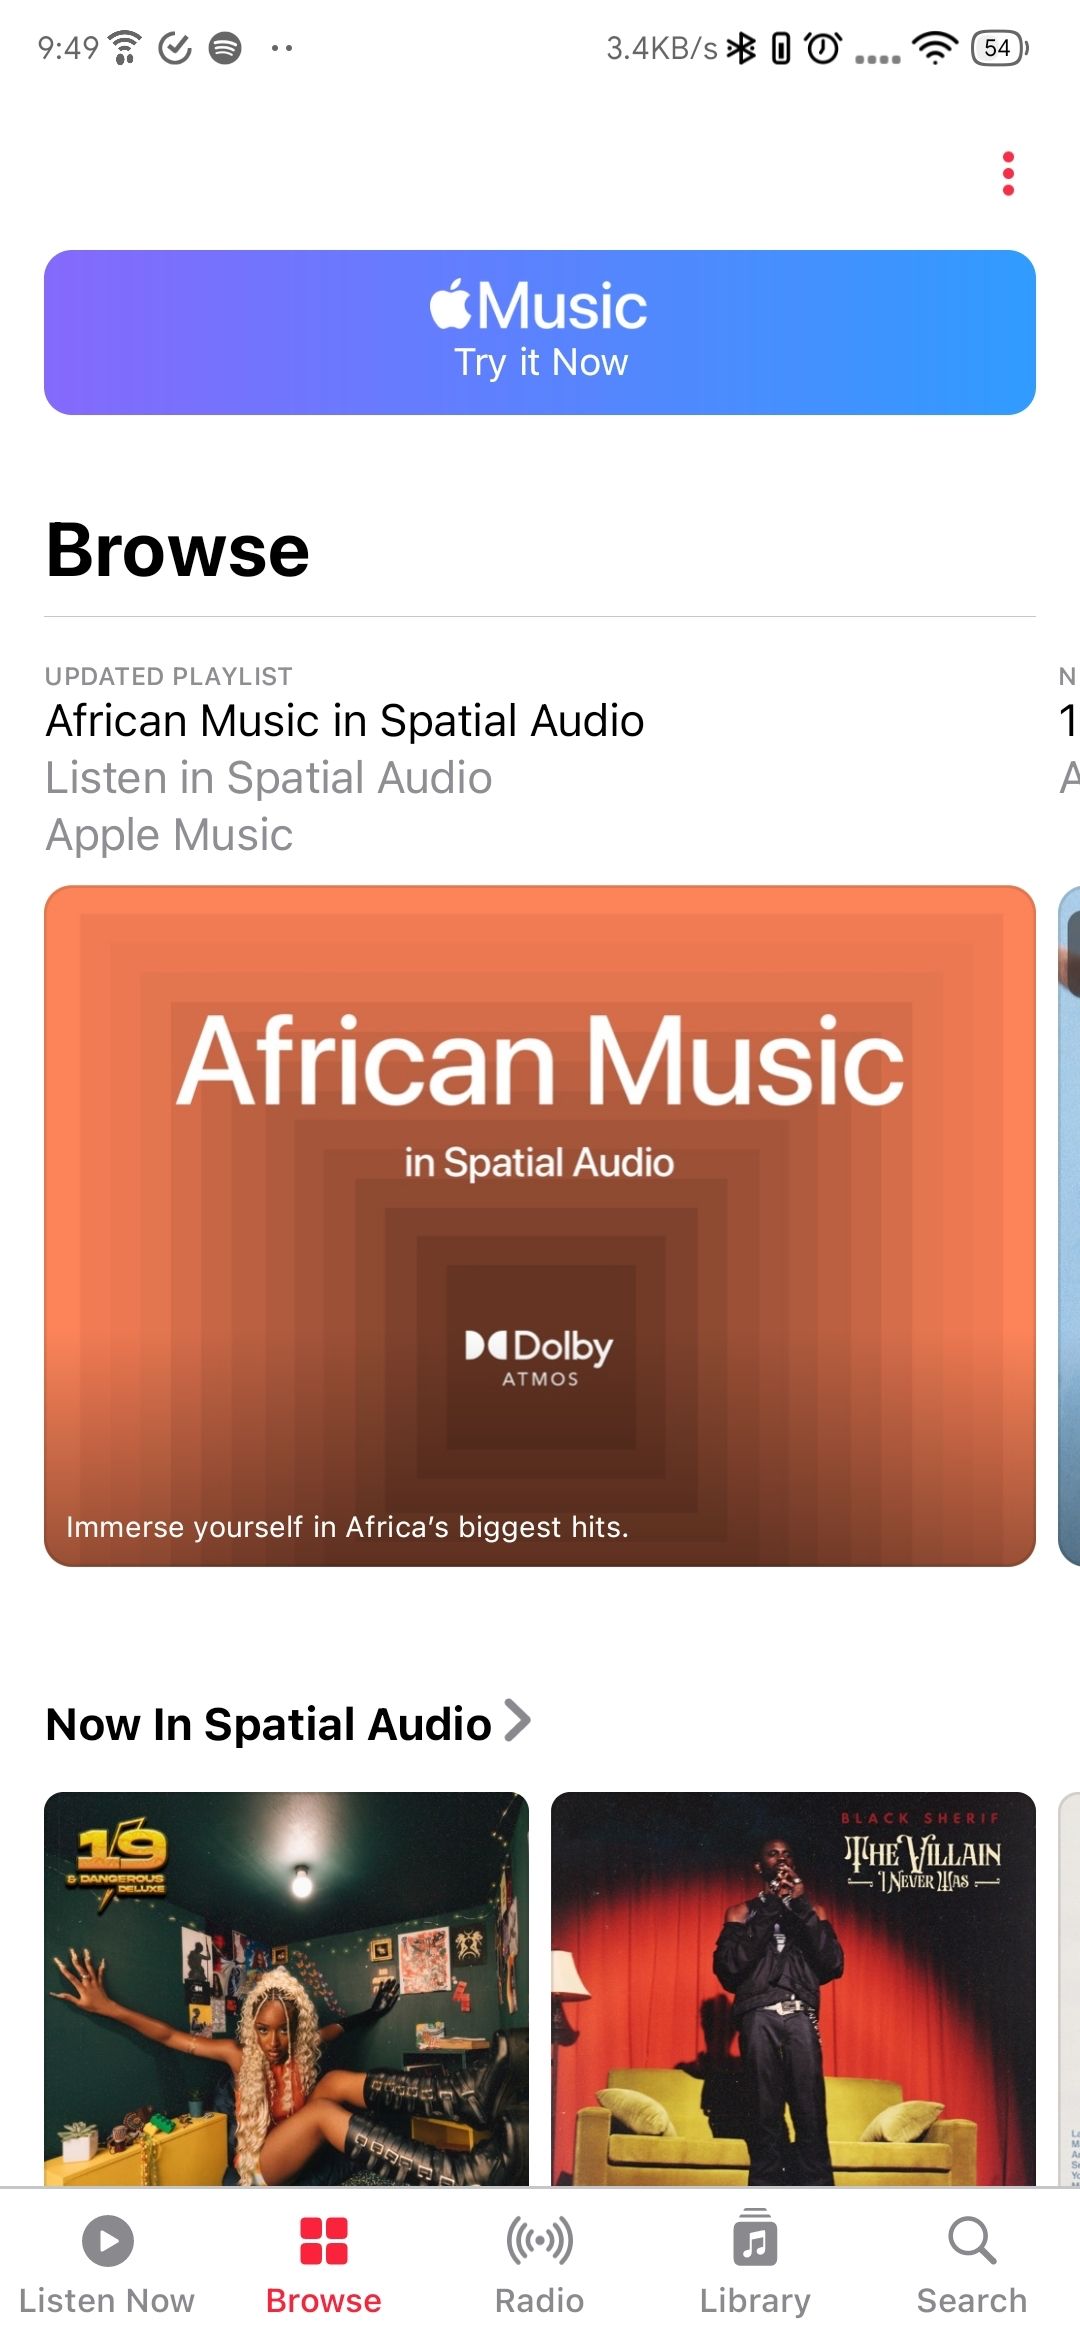 Apple Music Browse tab on mobile